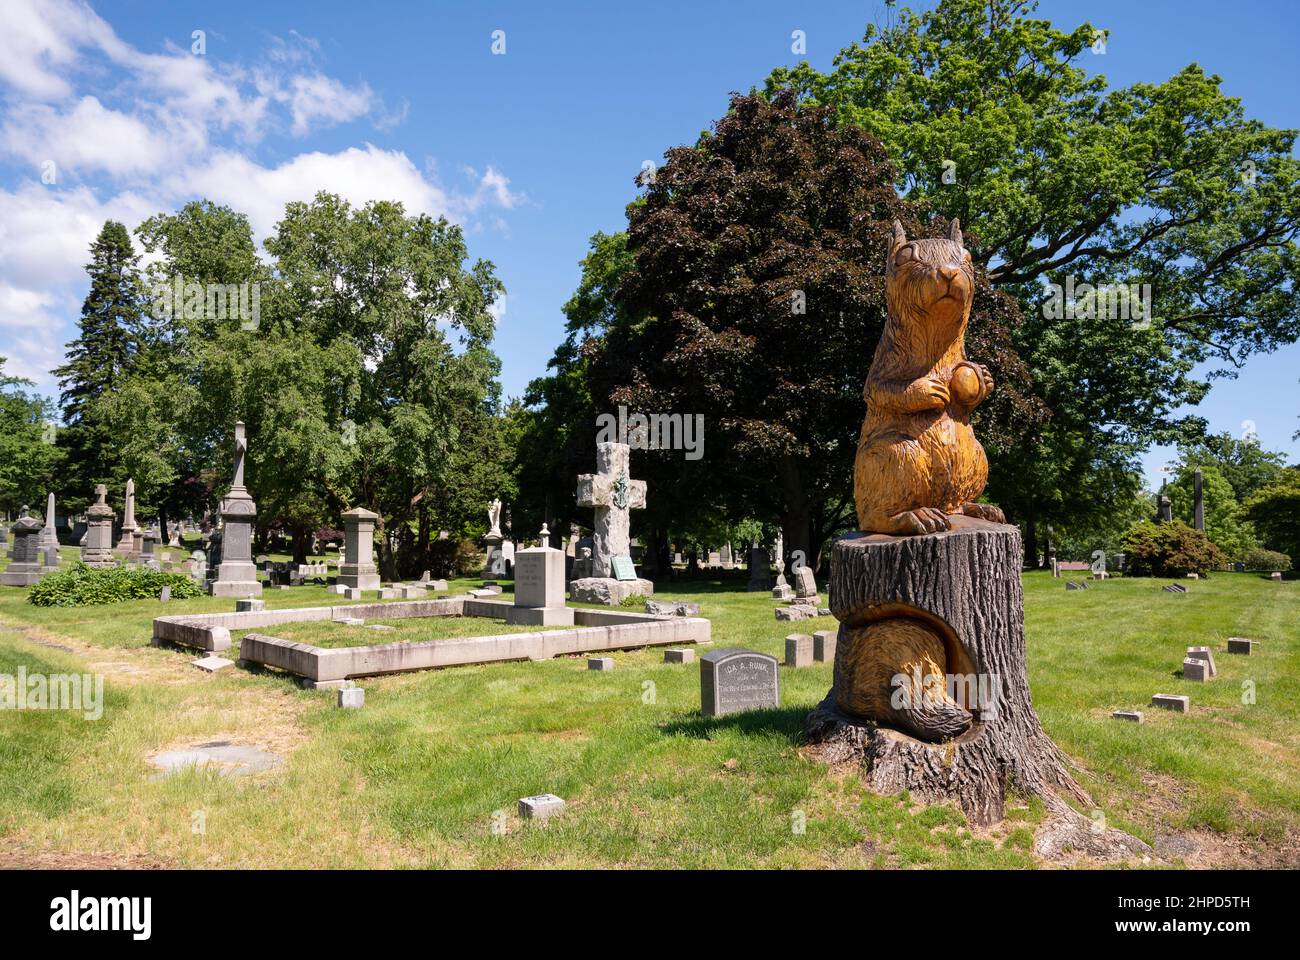 Tree carving of a squirrel at Woodlawn Cemetery in The Bronx, New York City Stock Photo